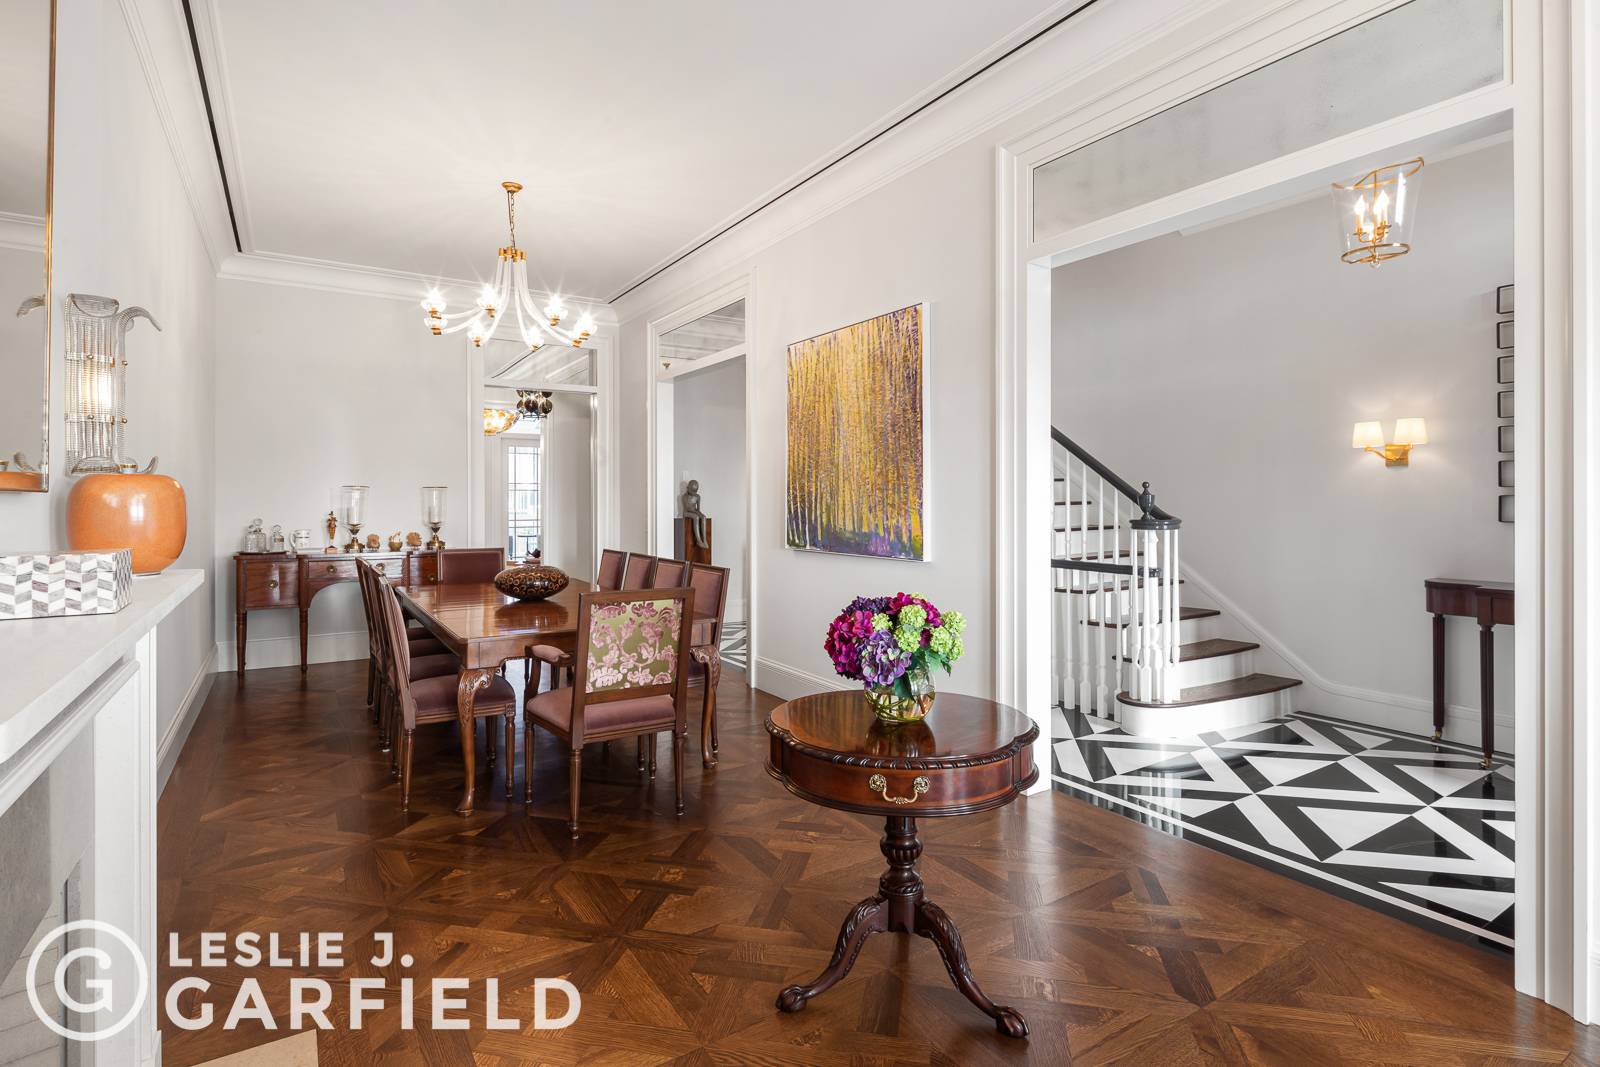 30 West 85th Street is a magnificently renovated, elevatored, 21 foot wide, single family home that is the embodiment of state of the art opulence.